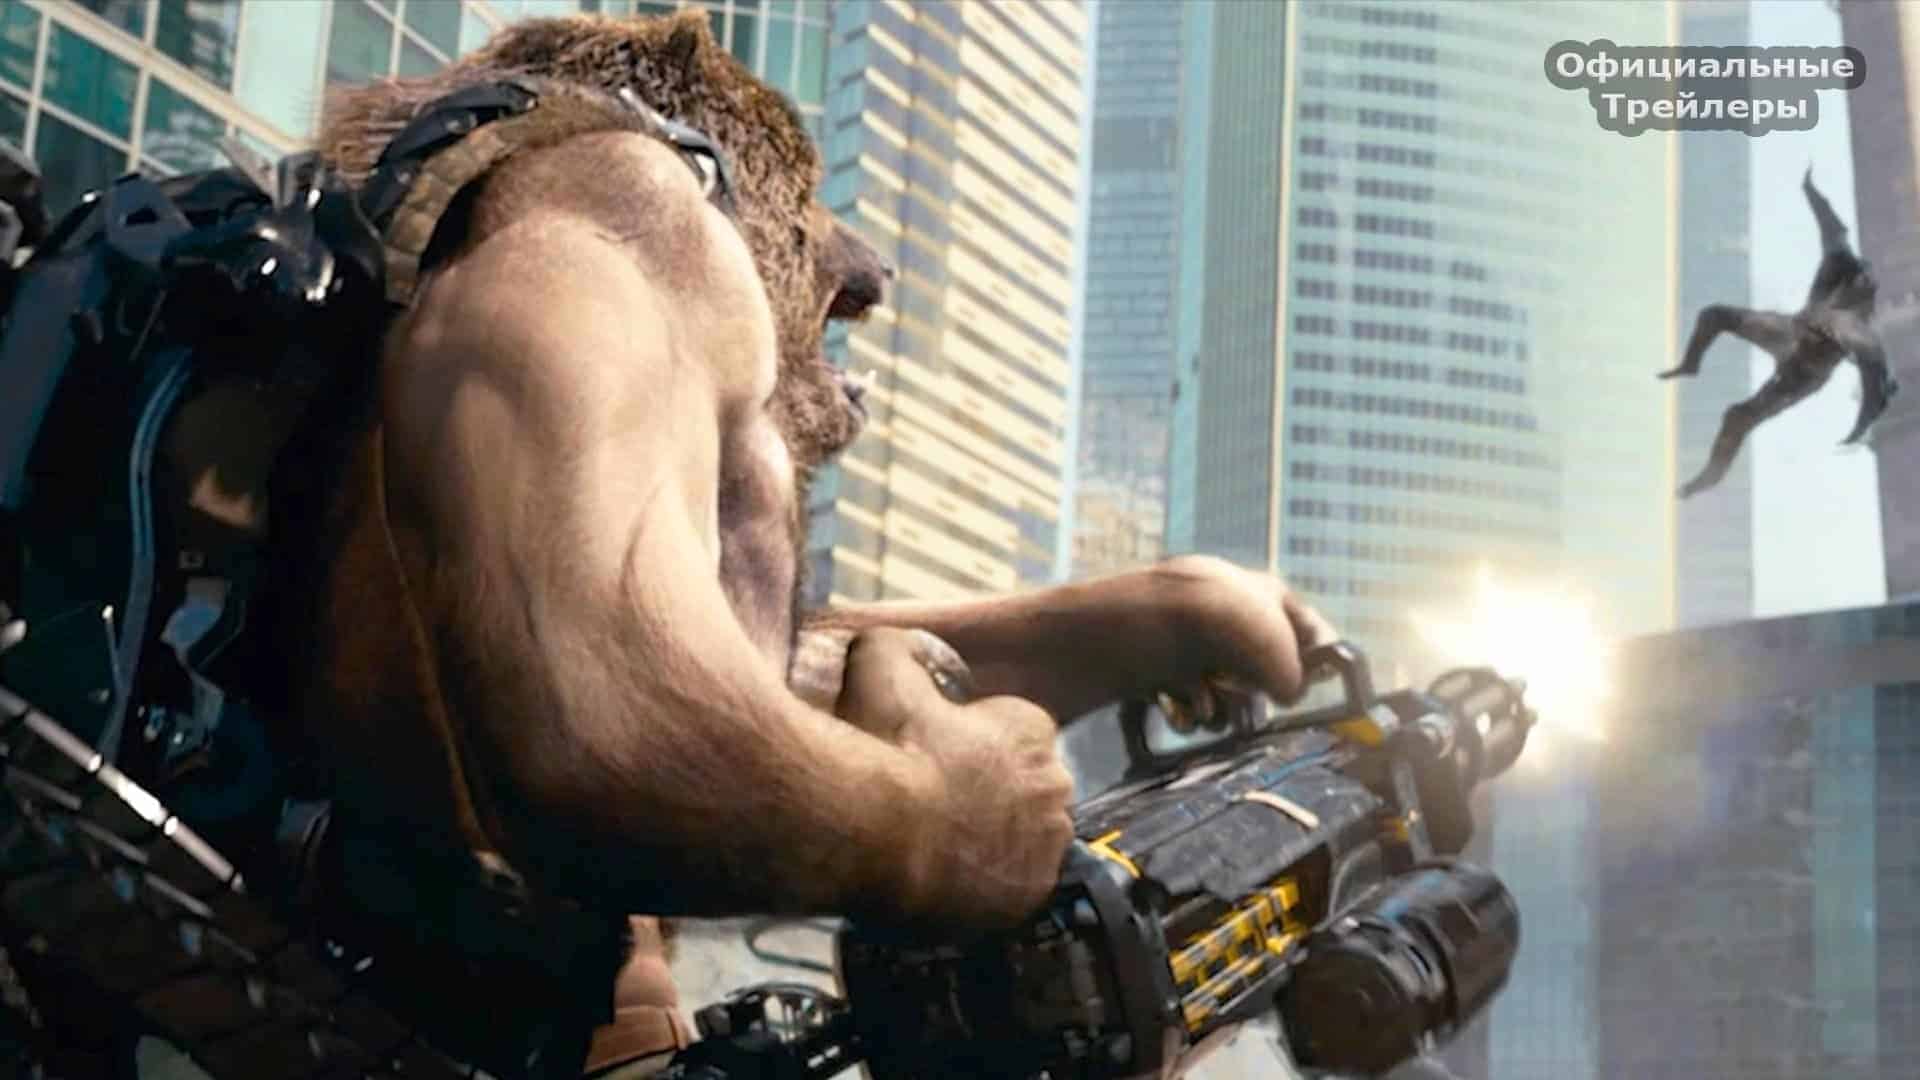 Guardians - Trailer for the Russian answer to Hollywood superhero films